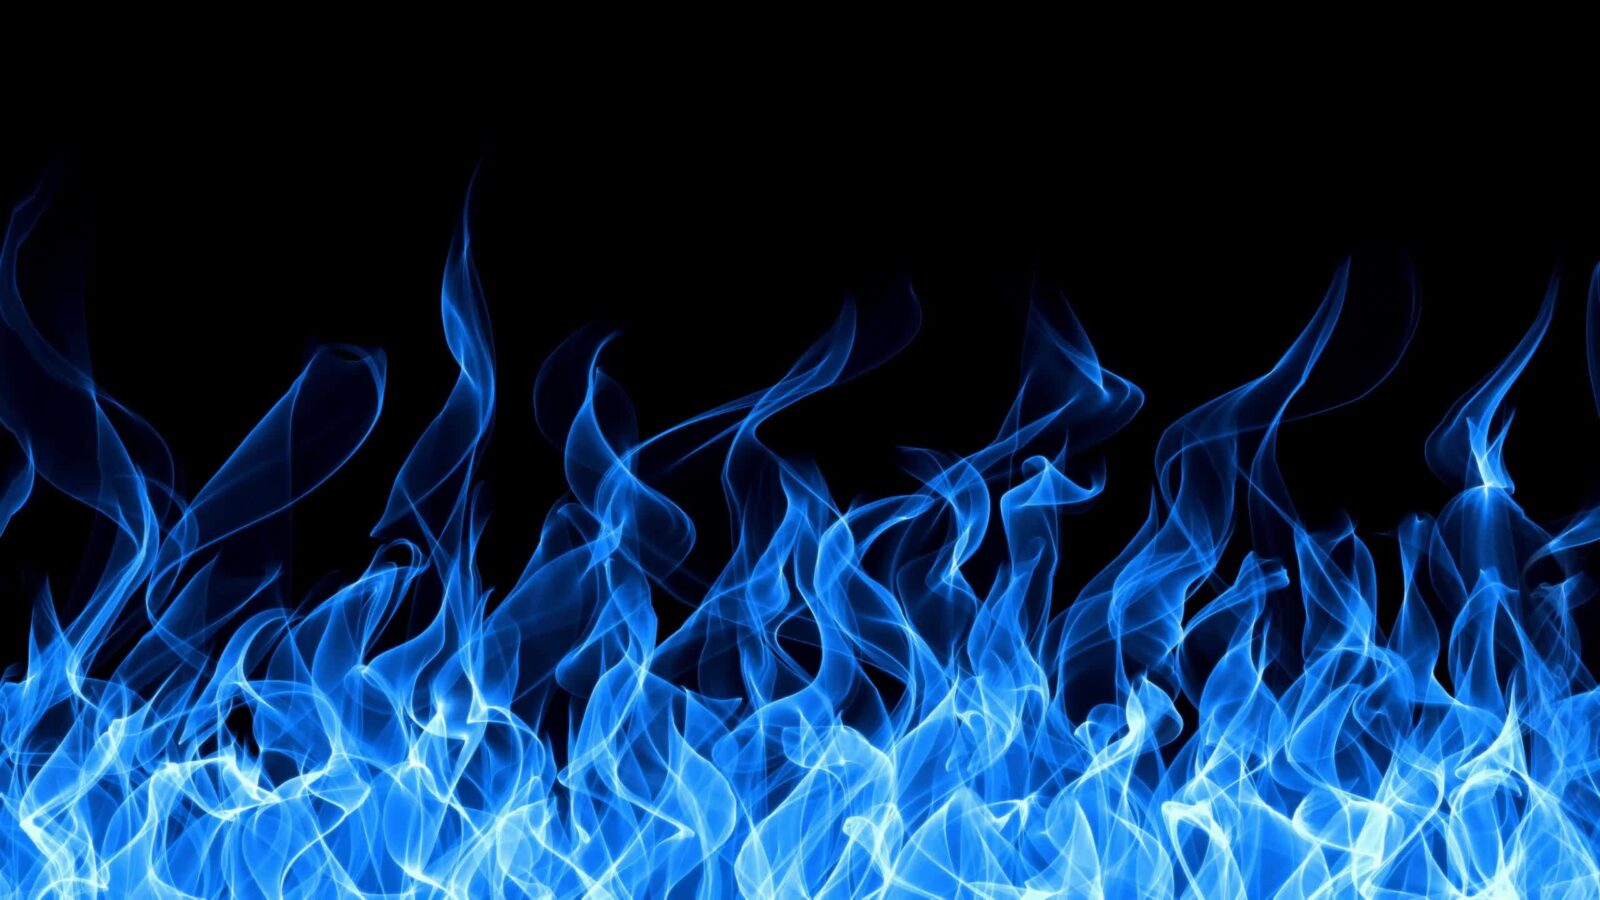 LiveWallpapers4Free.com | Blue Flame Abstract Art 2K - Free Windows Wallpaper